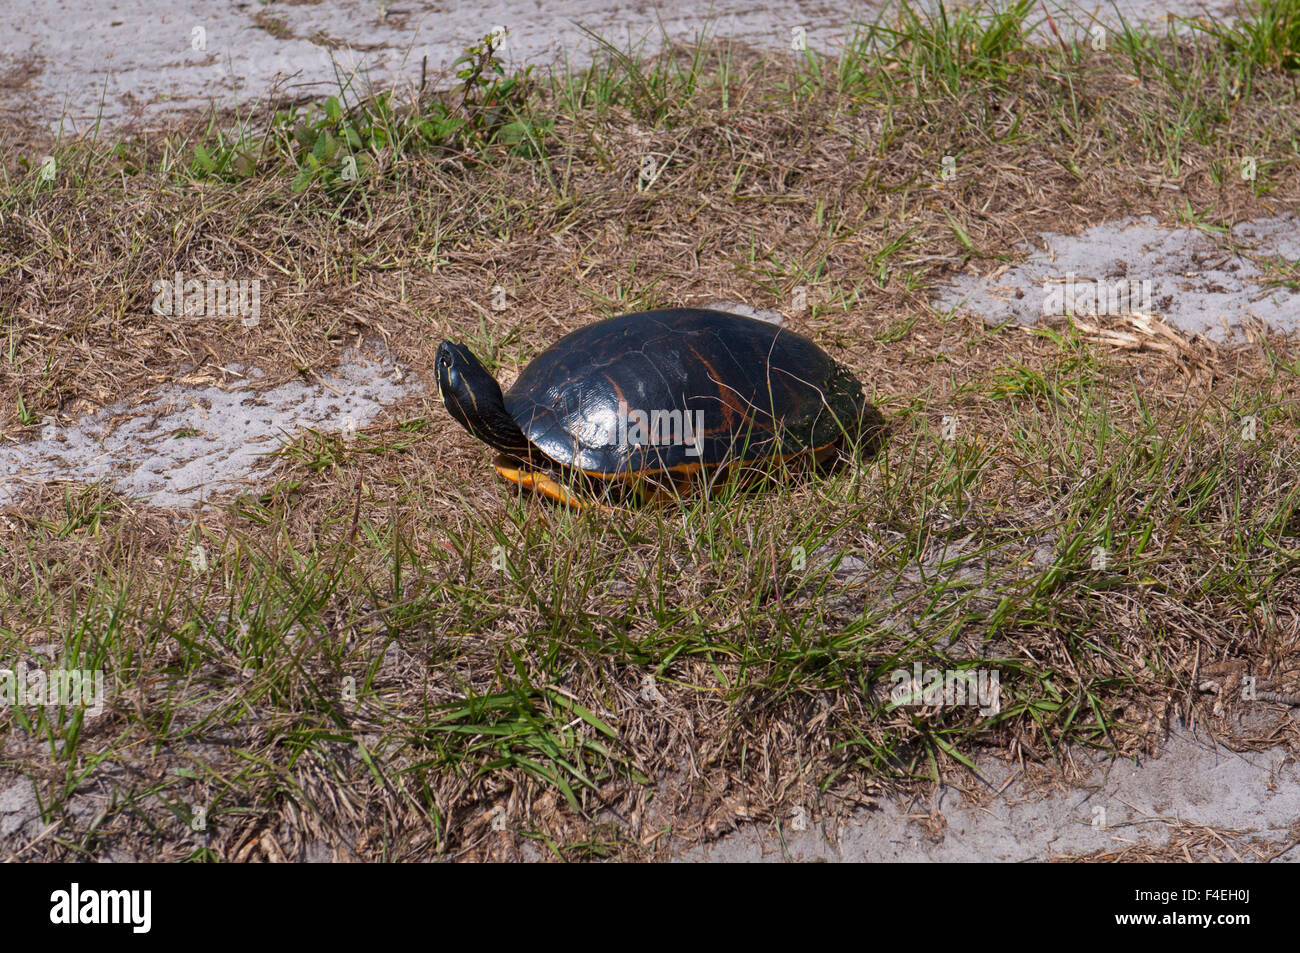 North America, USA, Florida, Immokalee, Red-bellied Cooter Stock Photo